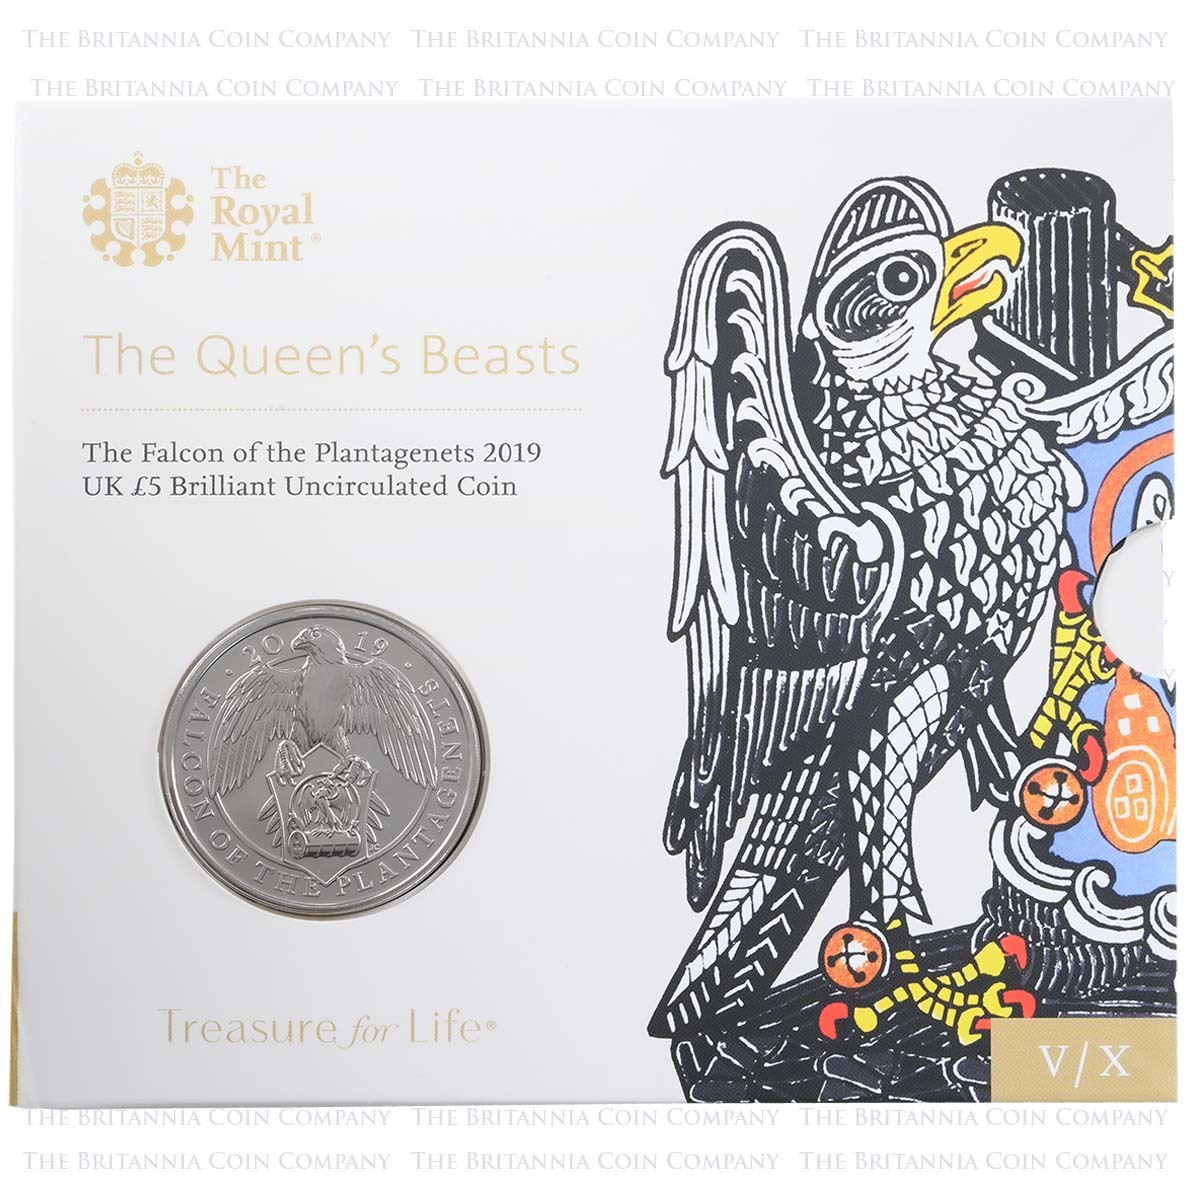 UK19QFBU 2019 Queen's Beasts Falcon Of The Plantagenets £5 Crown Brilliant Uncirculated In Folder Packaging